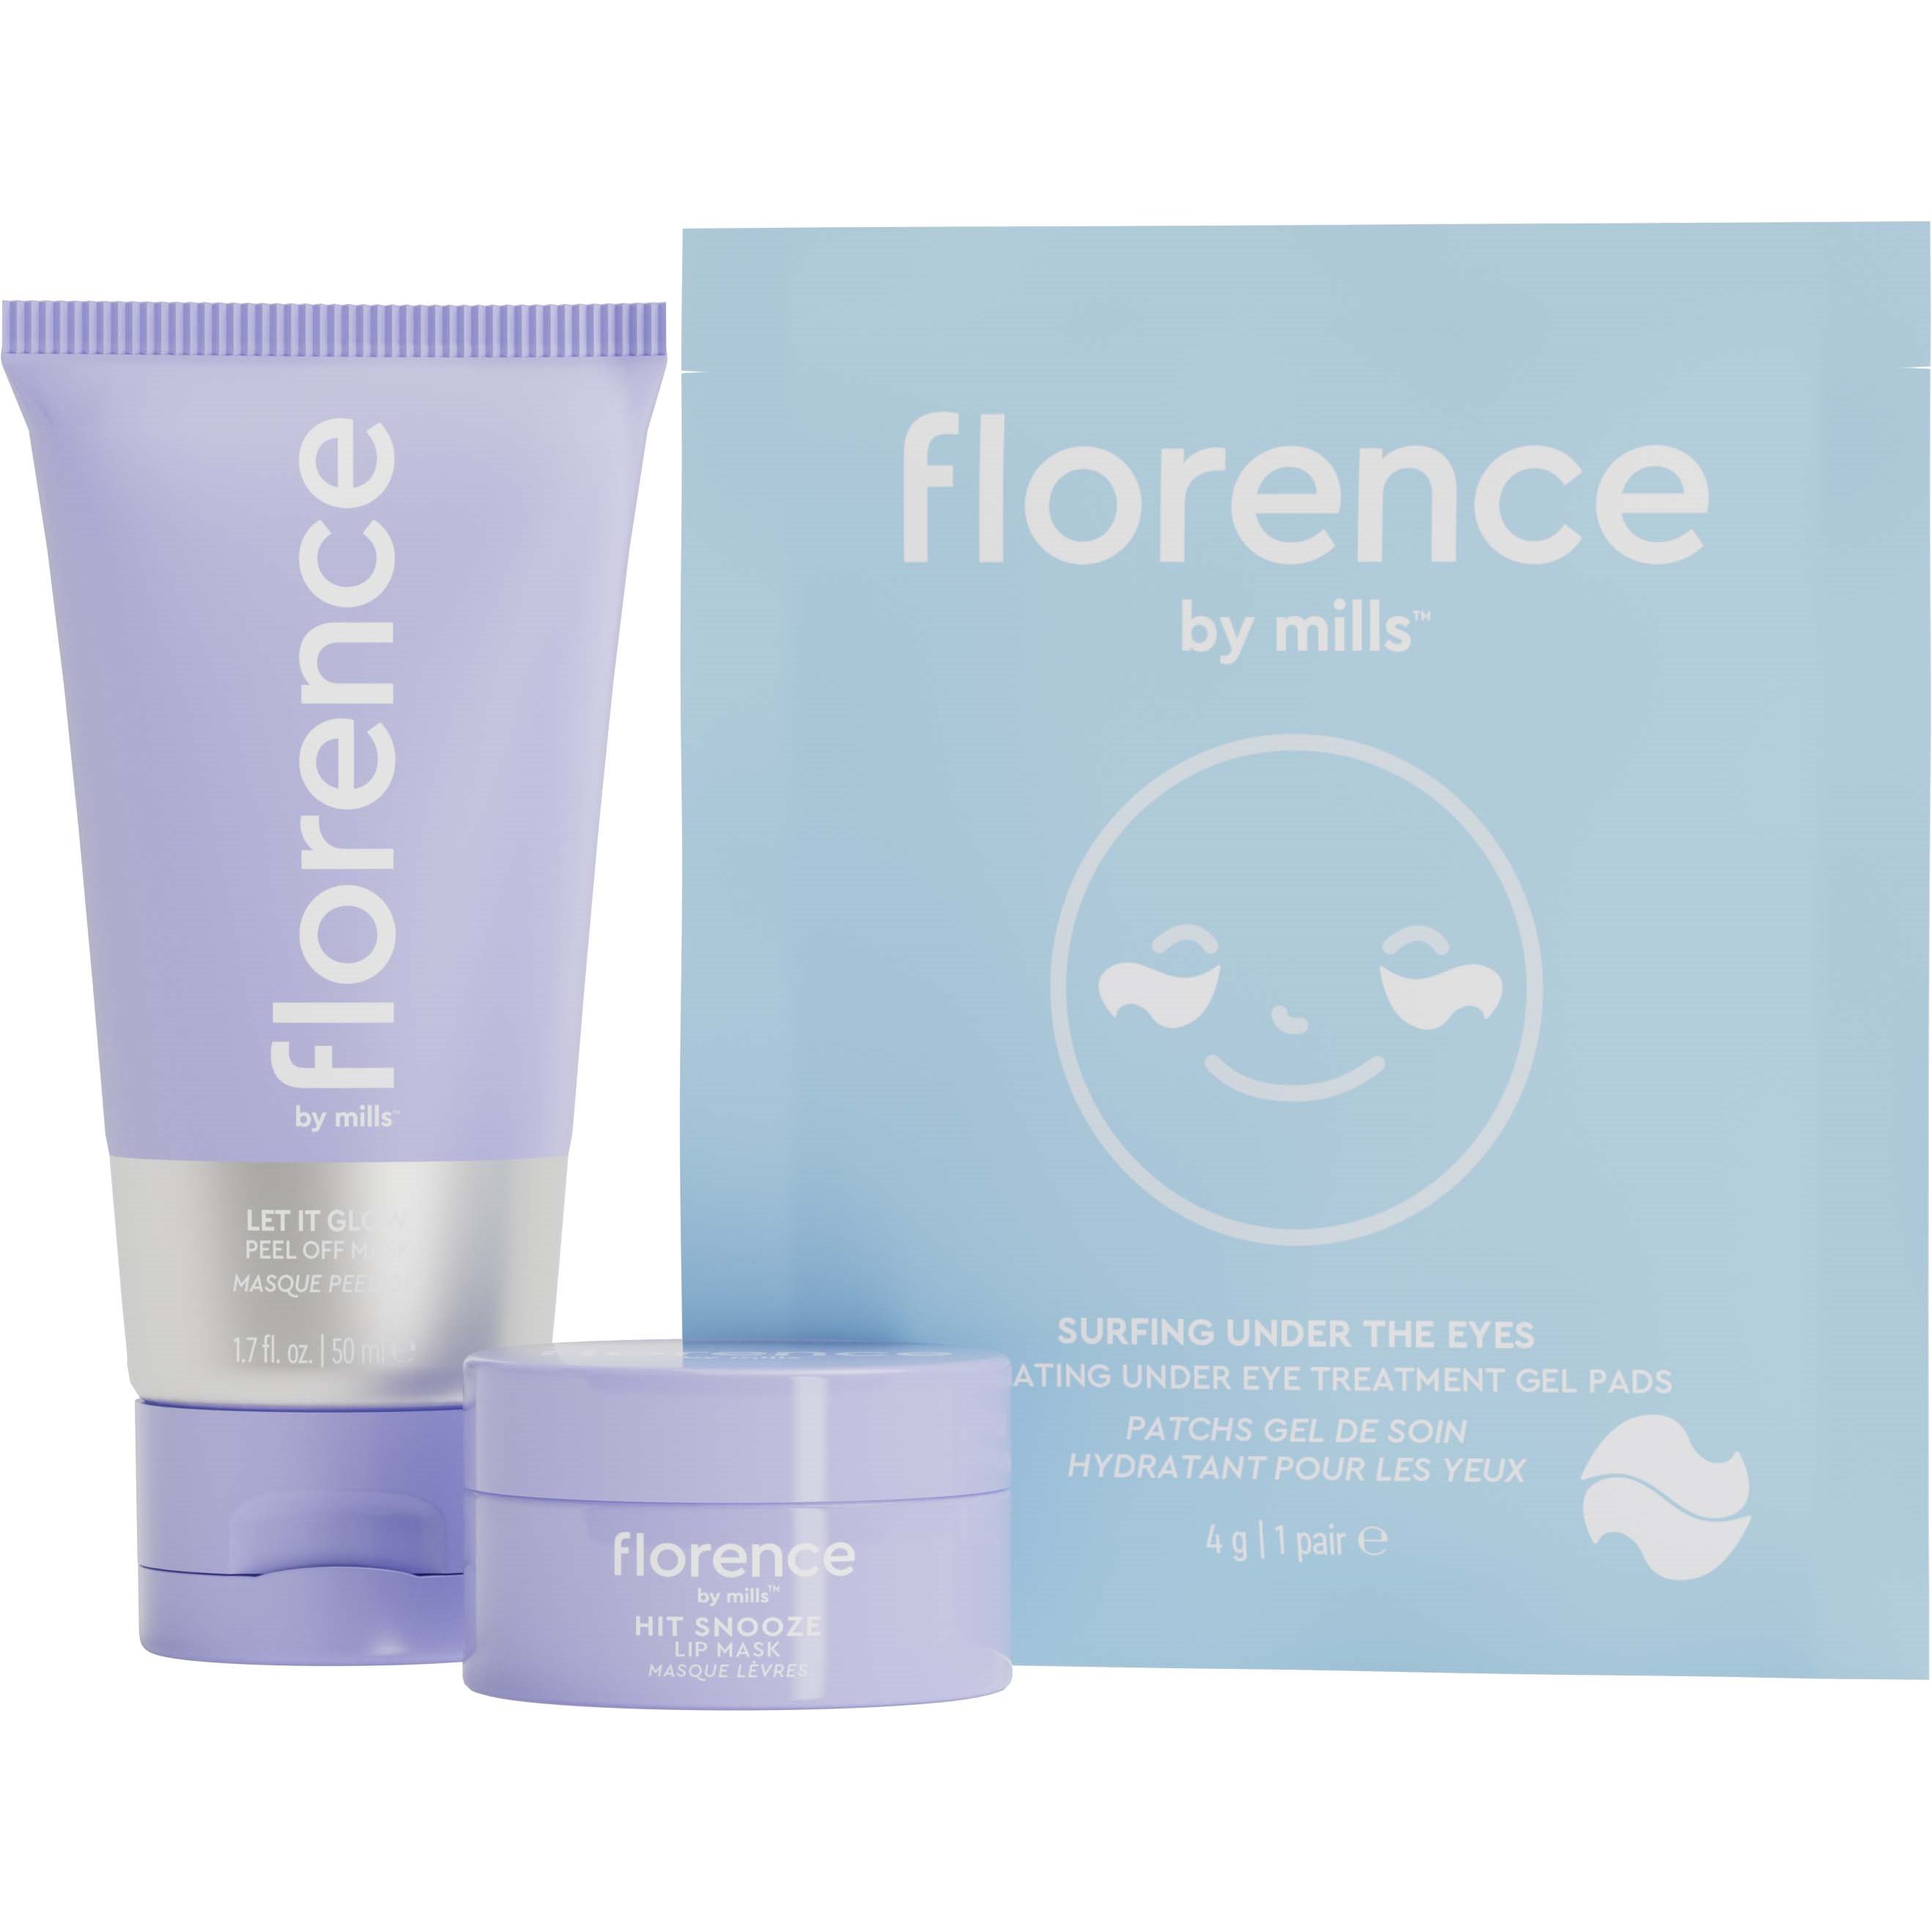 Florence By Mills Gift Set Masking Party Gift Set